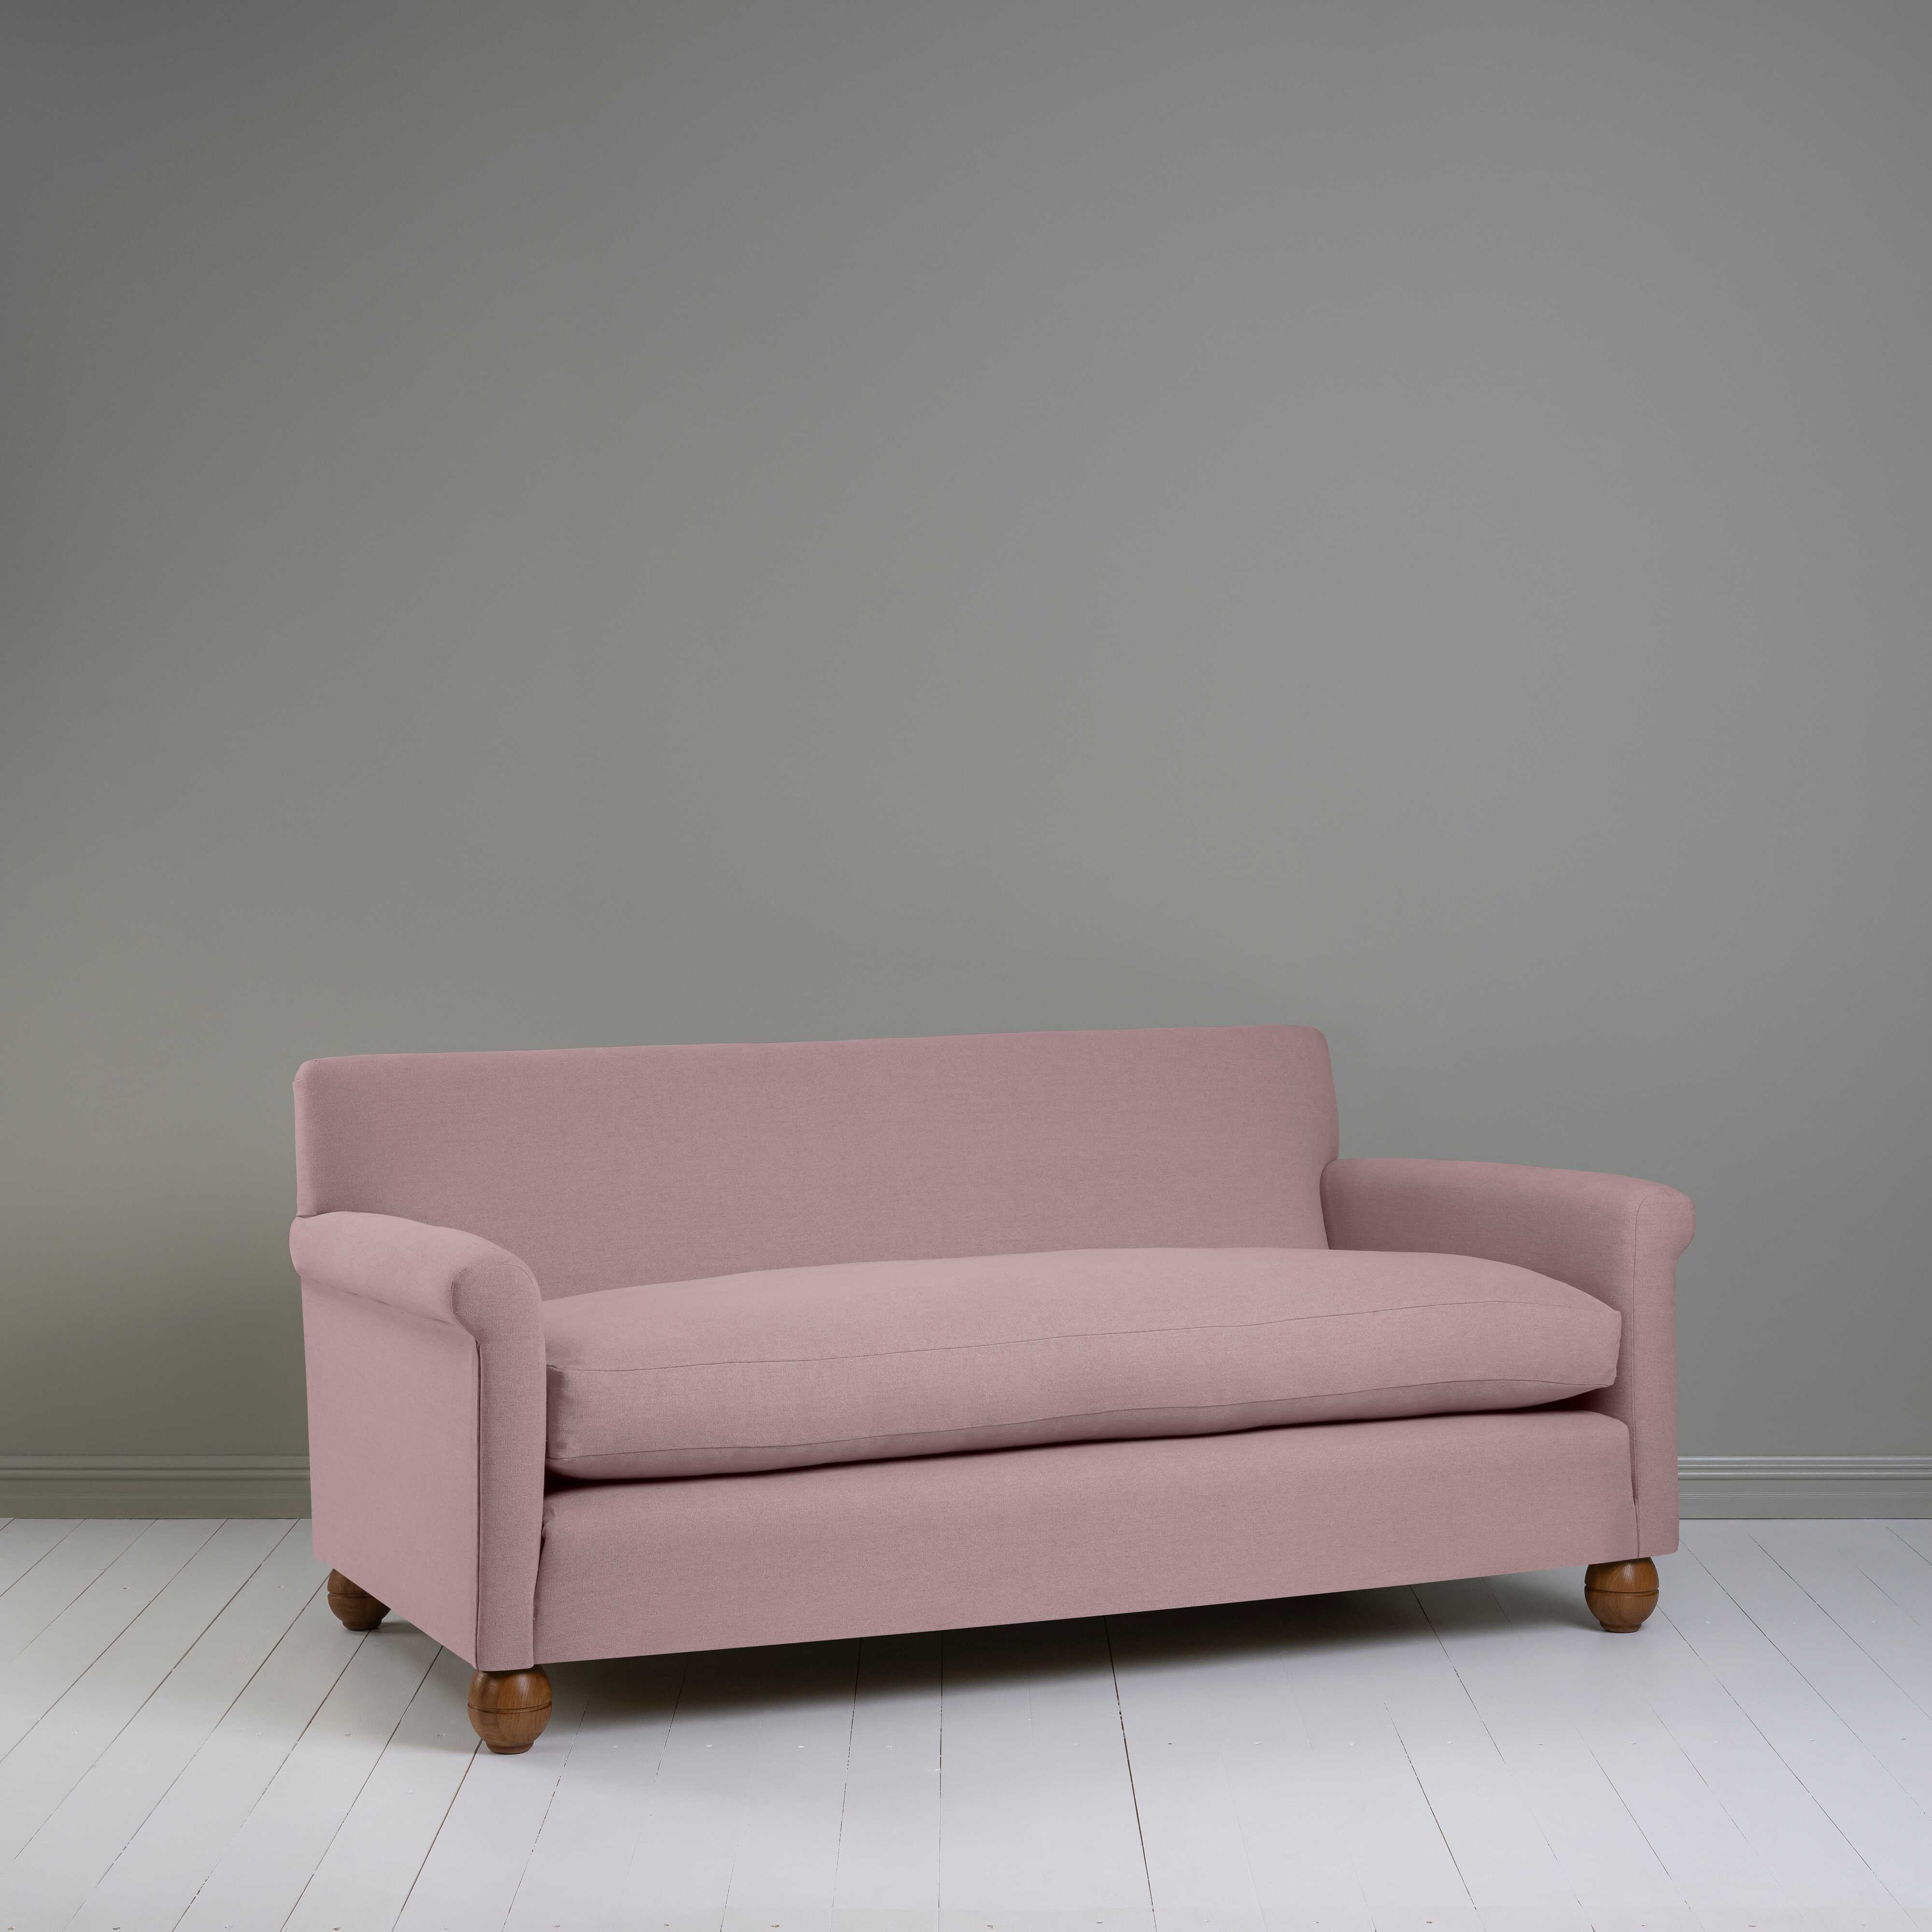  Idler 3 Seater Sofa in Laidback Linen Heather 